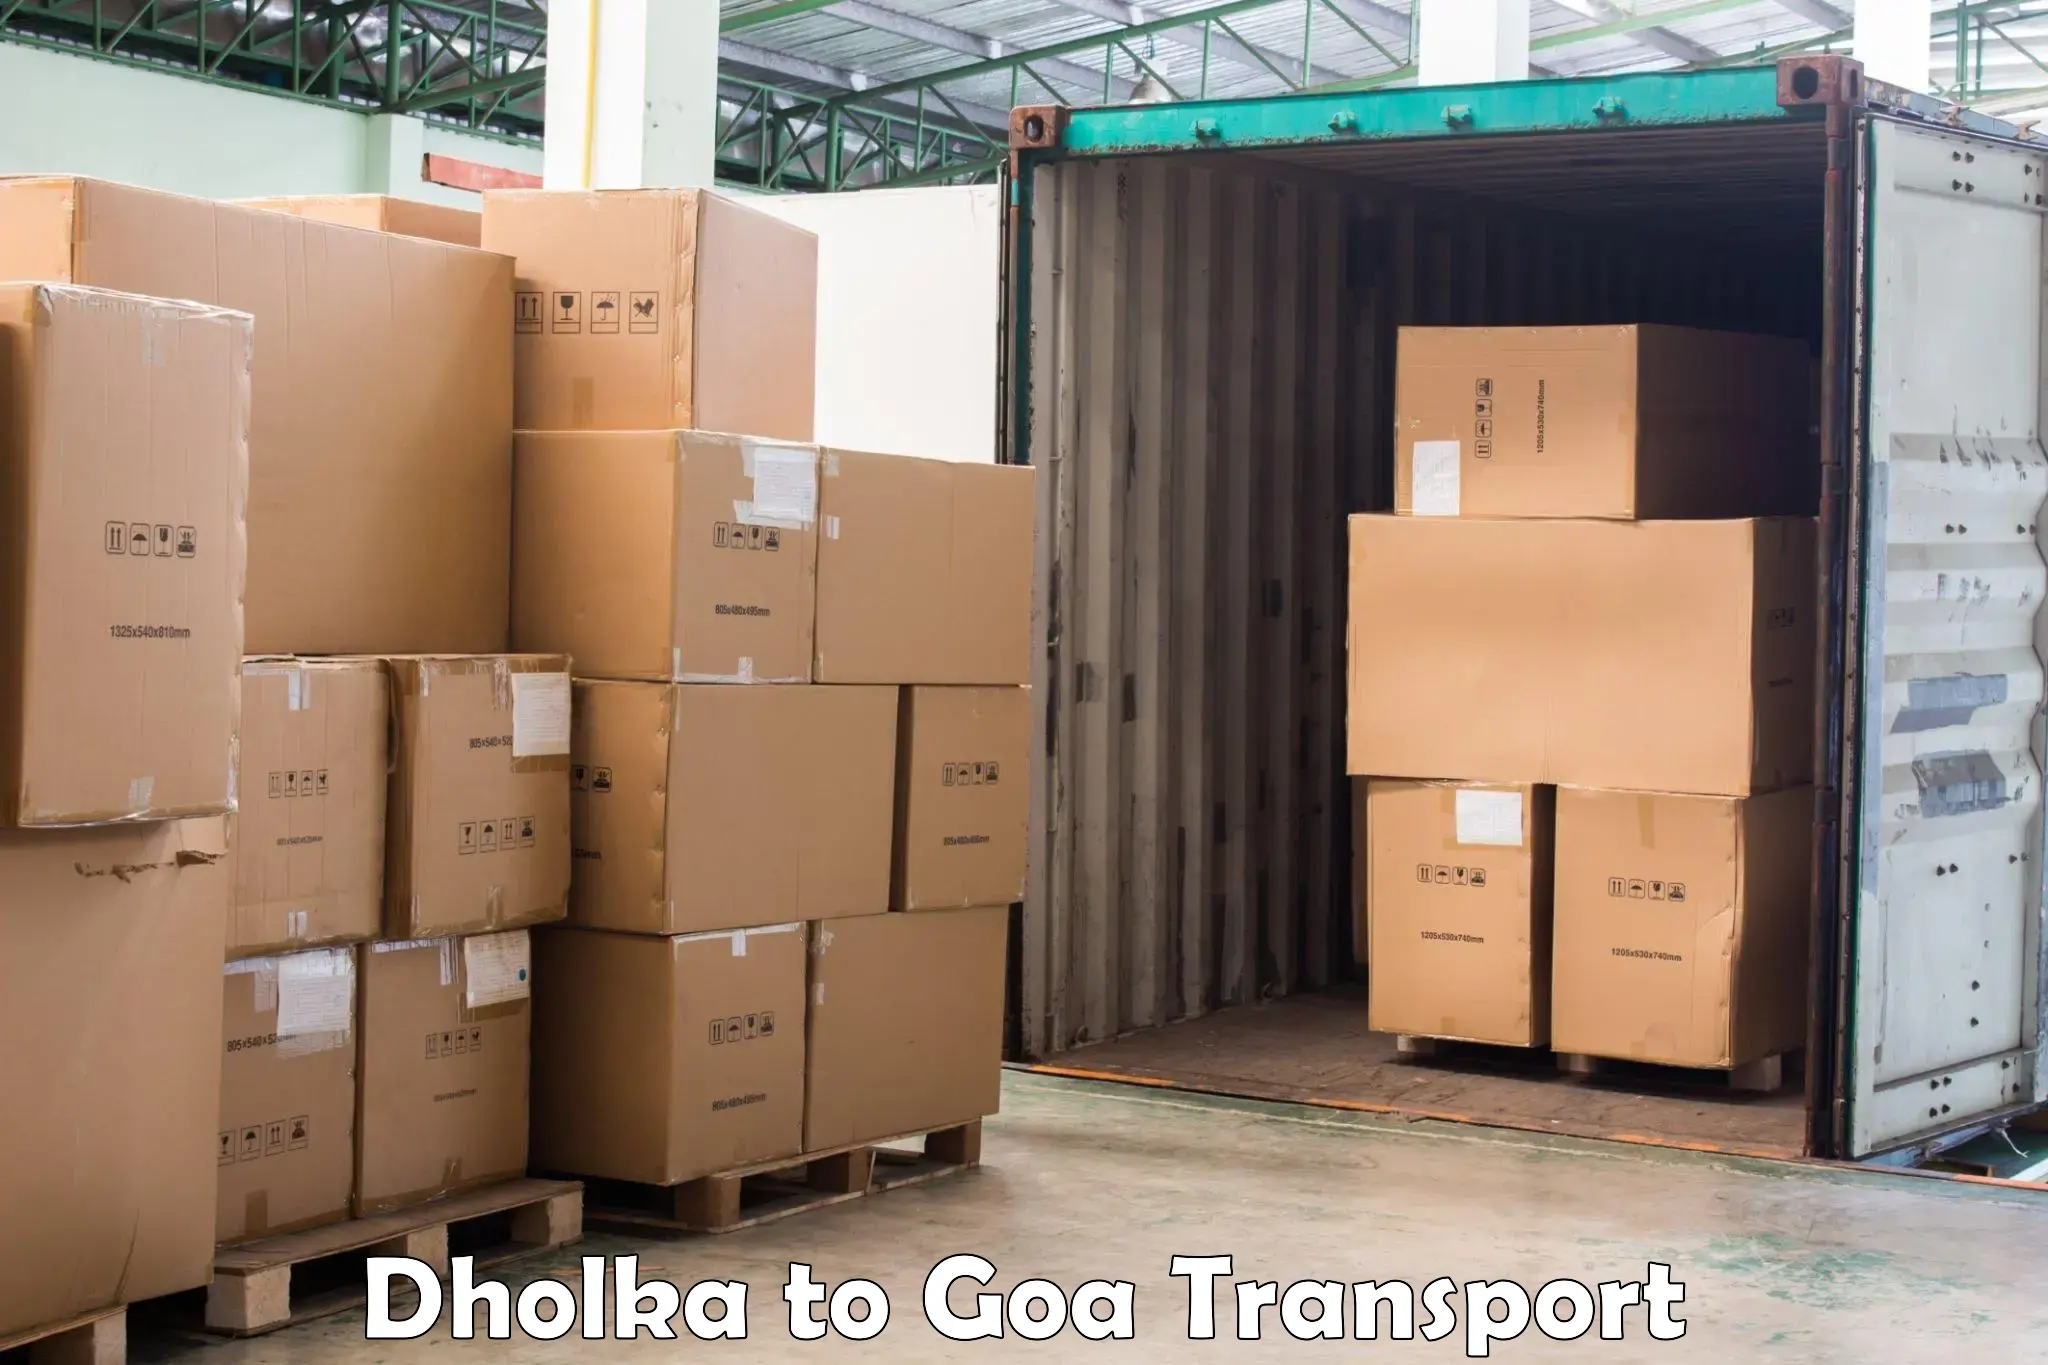 Nearby transport service Dholka to Goa